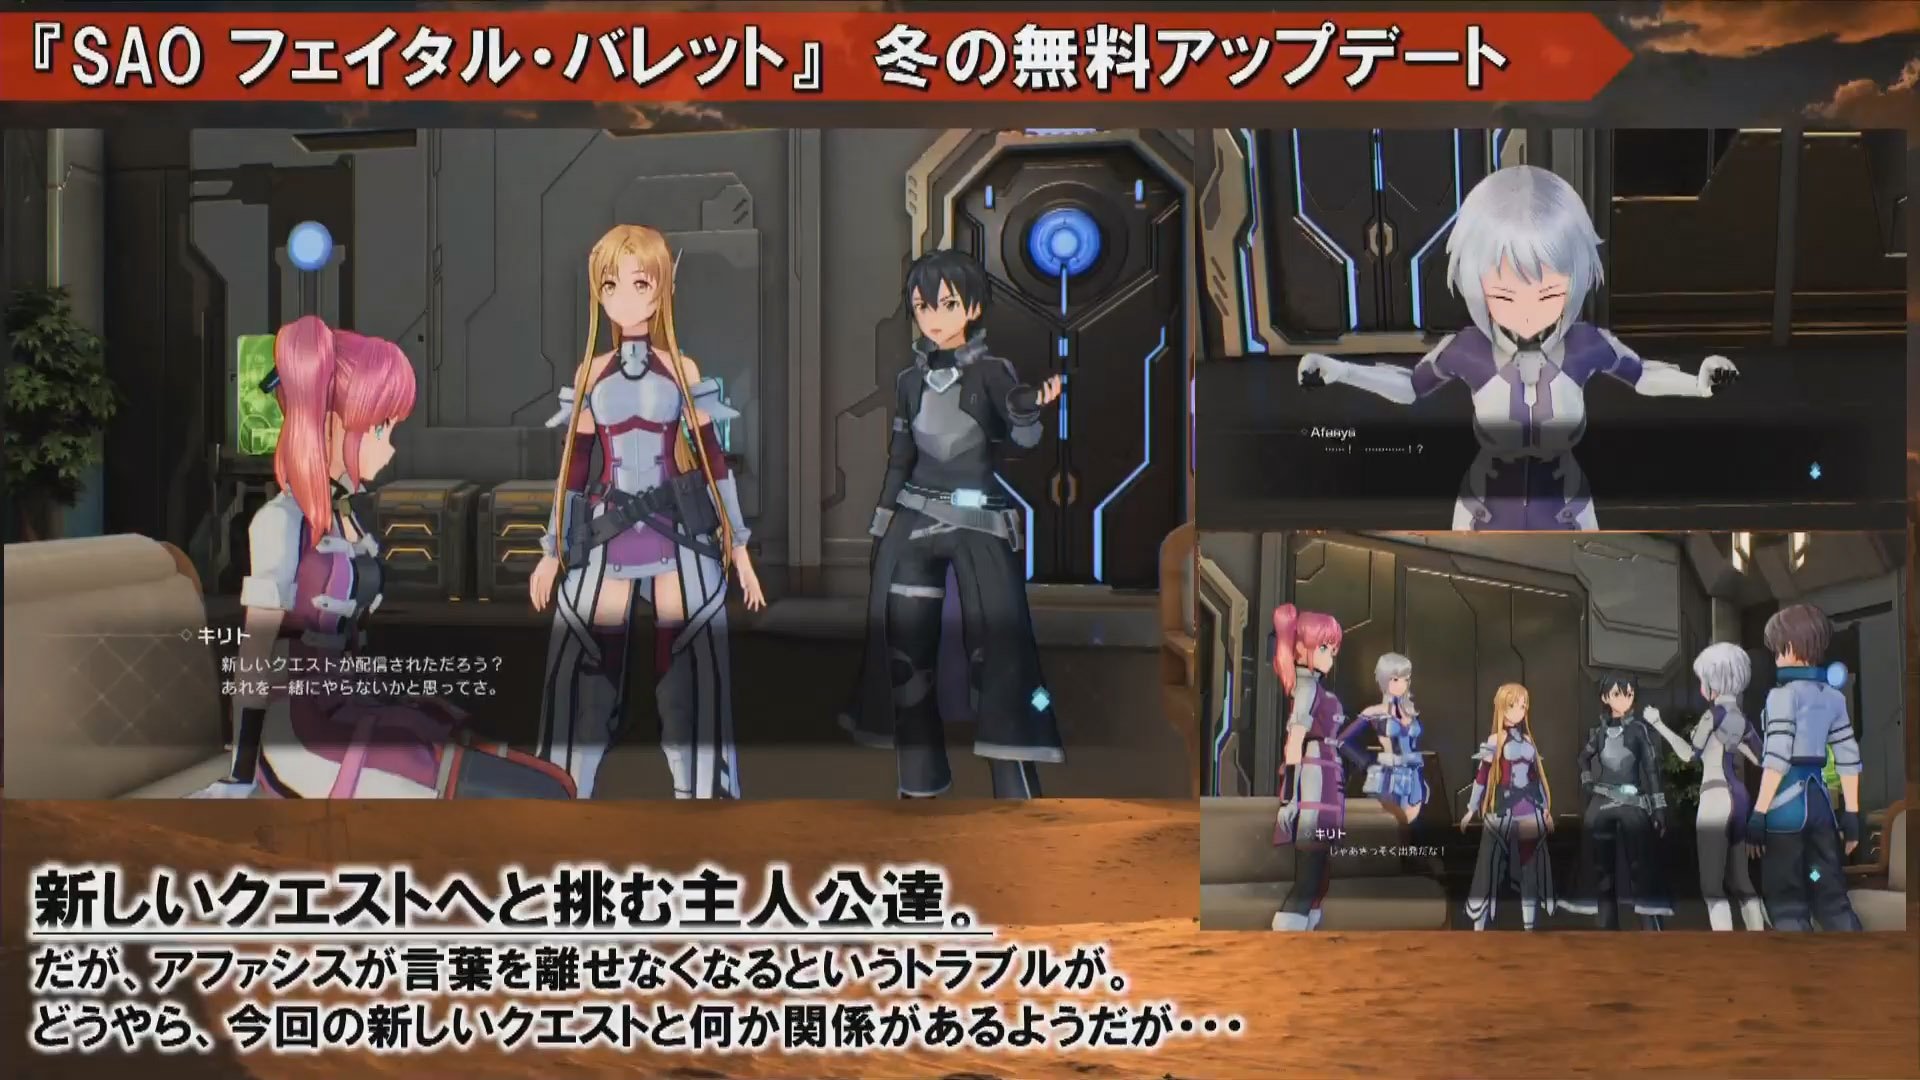 Preview: 'Sword Art Online: Fatal Bullet' a better take for a game